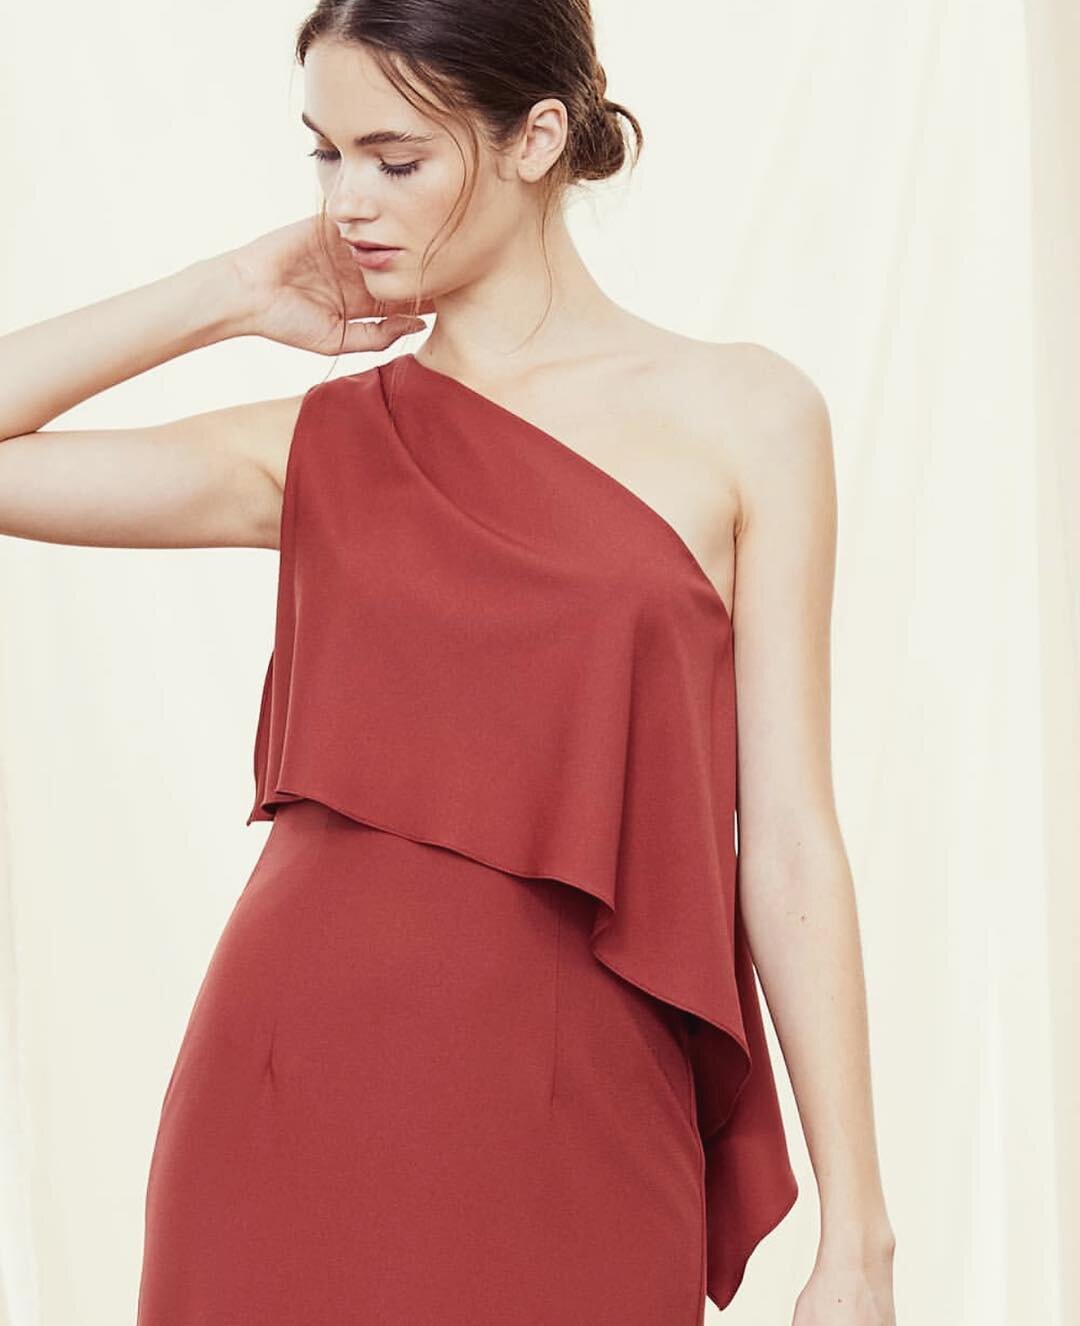 Autumn vibes 🍂  with this stunning one shoulder Amsale bridesmaids dress - shown in &quot;Cayenne&quot;. #bridesmaiddress #newstyles #newcolours #oneshoulder #bridalparty #instore